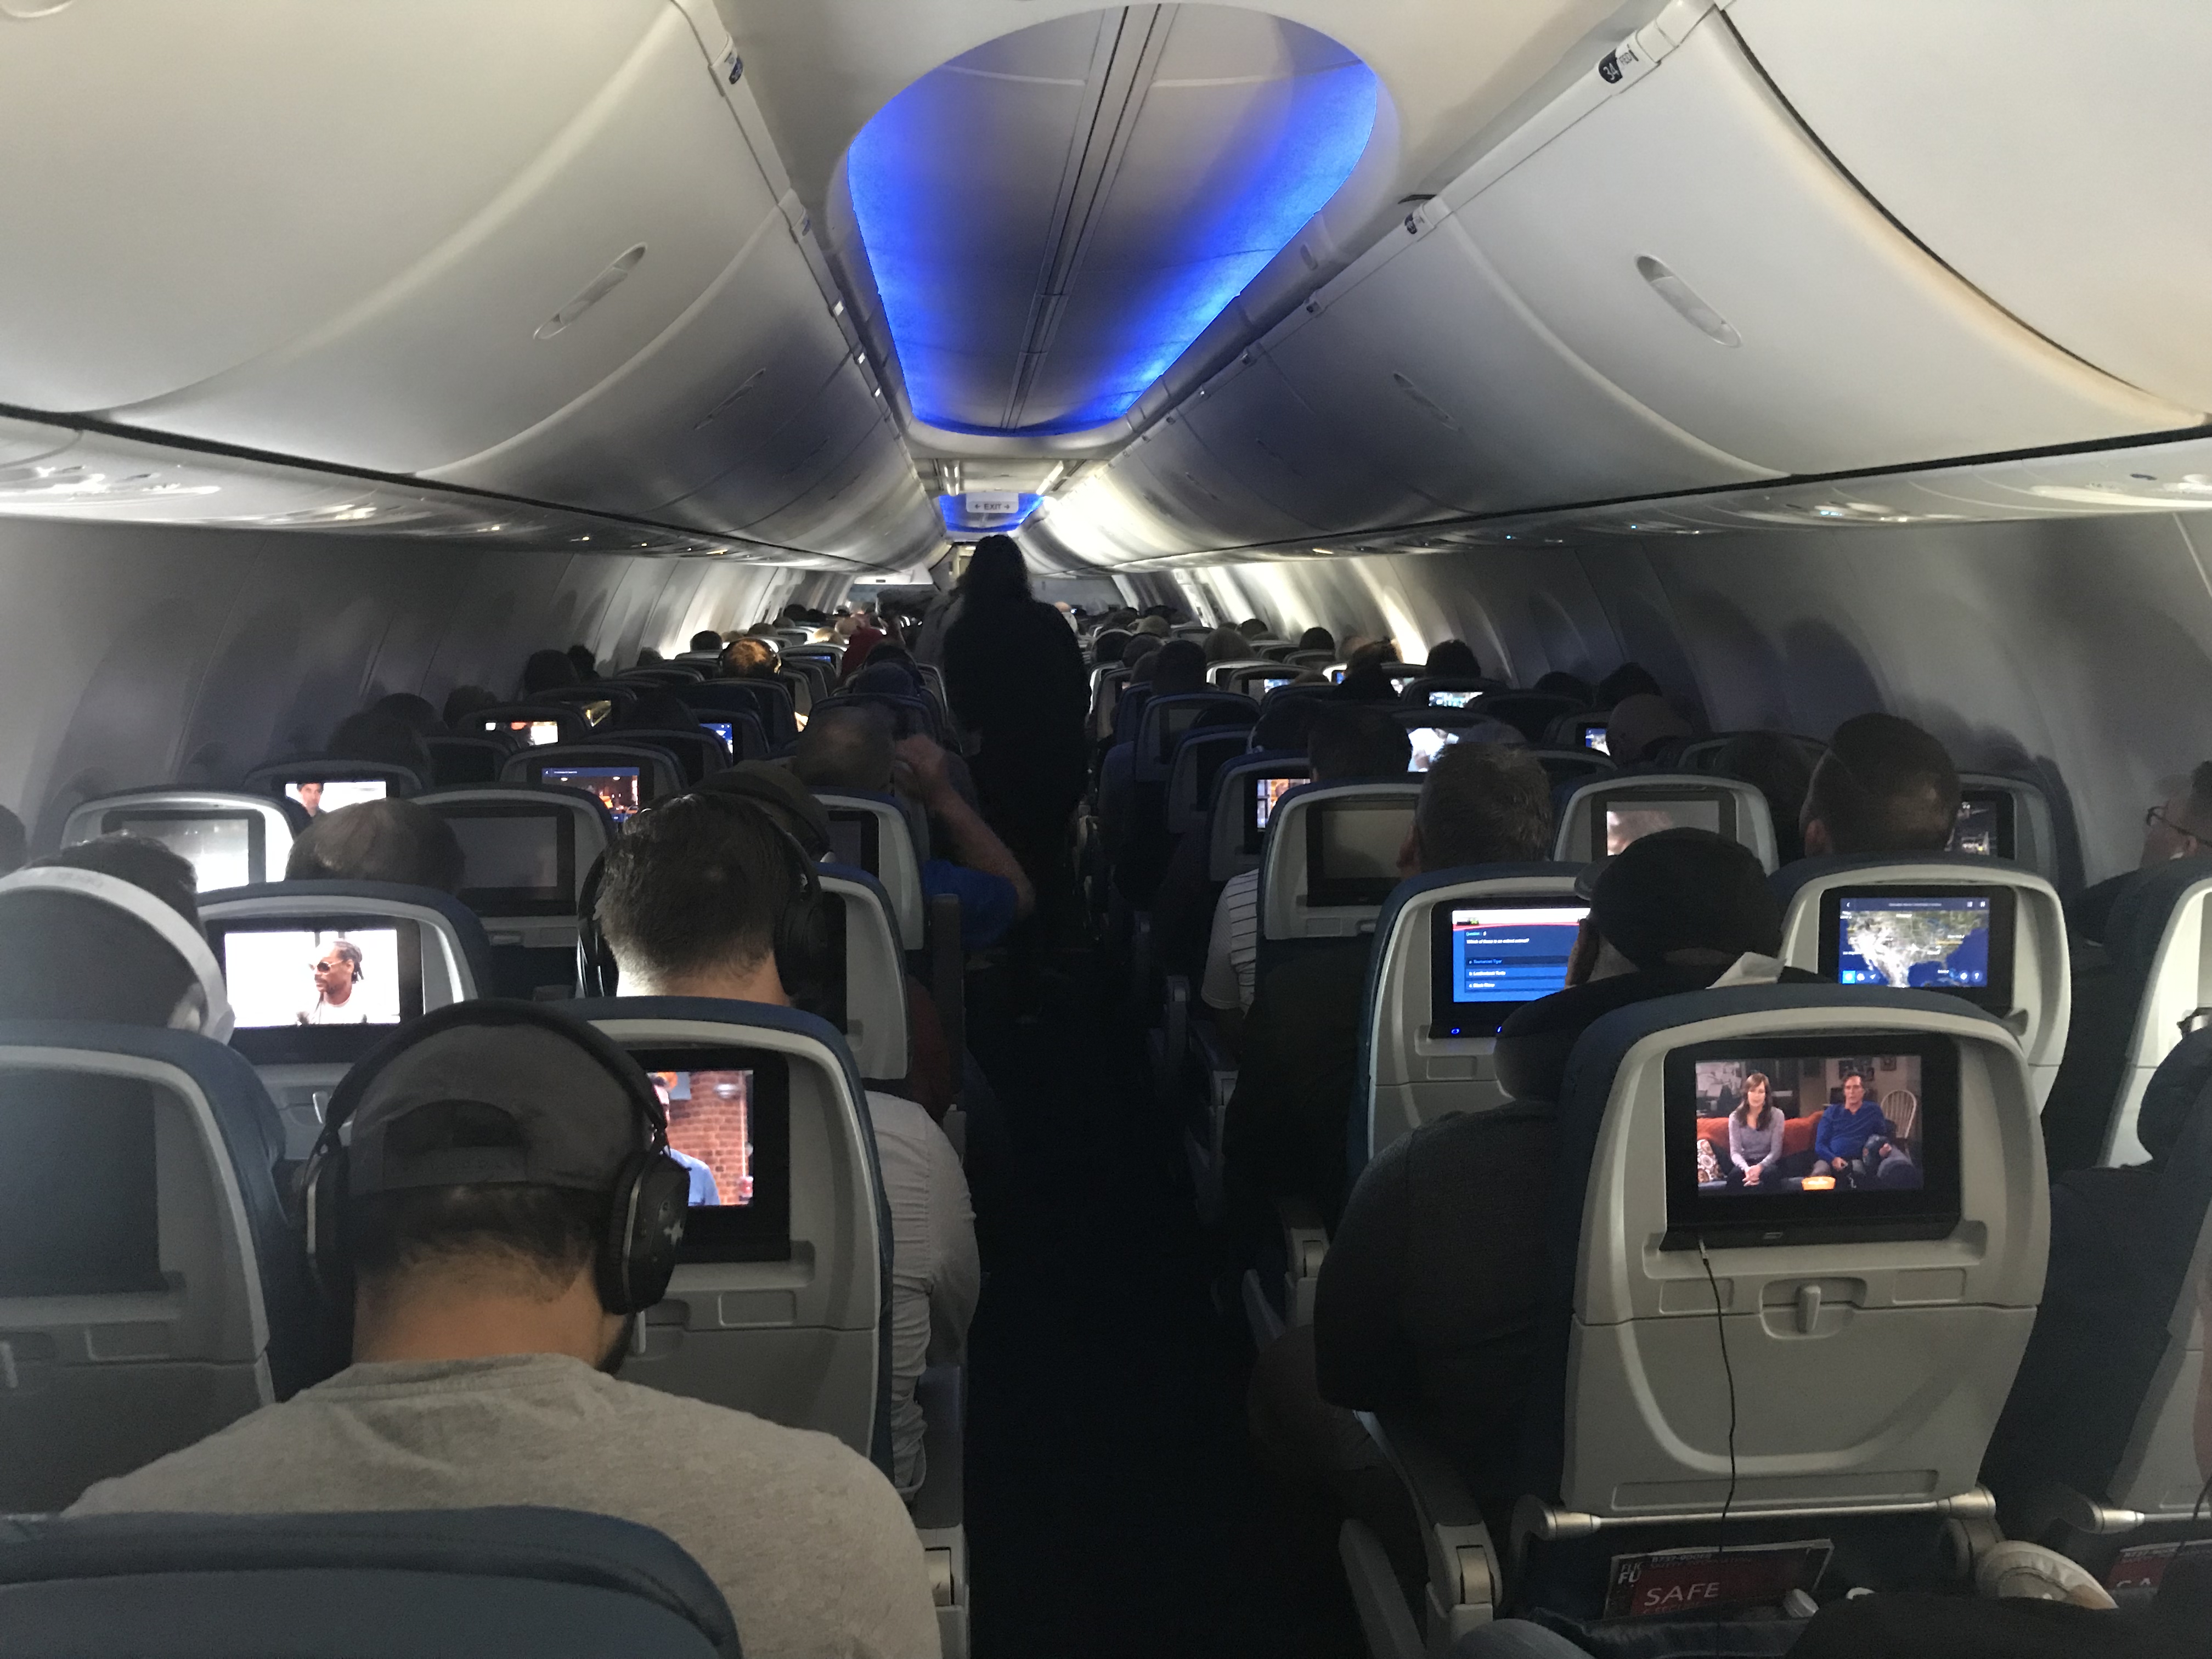 Delta 737 Economy Class Interior Points With A Crew